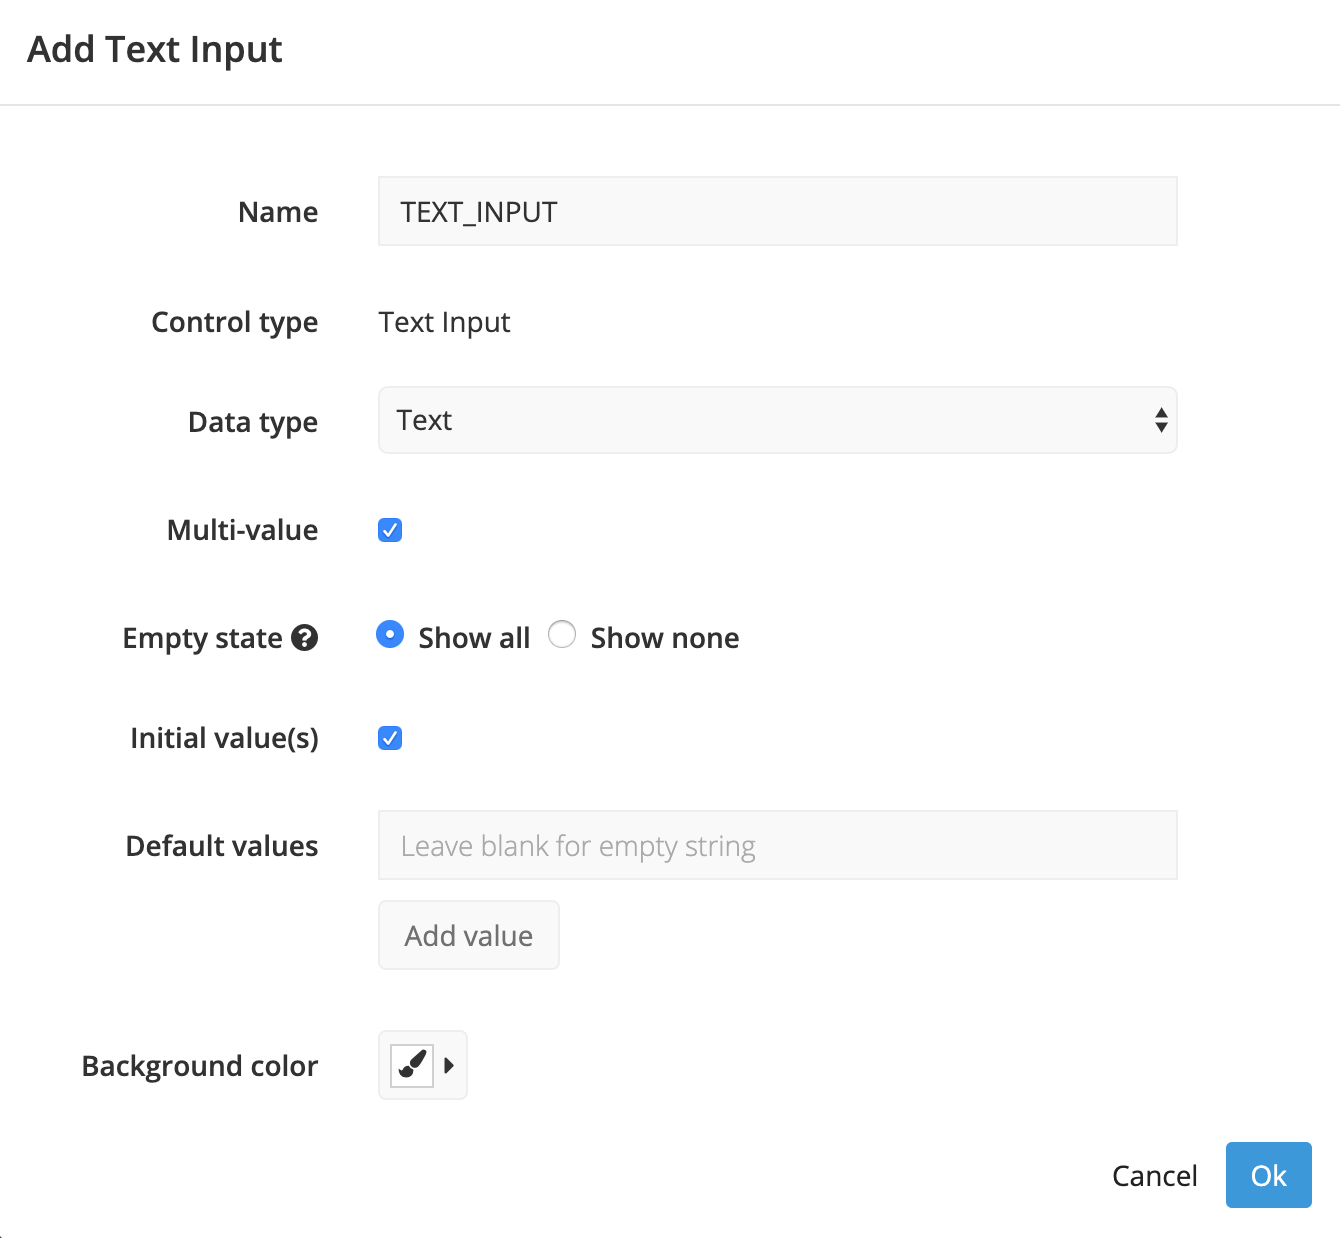 Add a Text Input to filter using numeric or text values